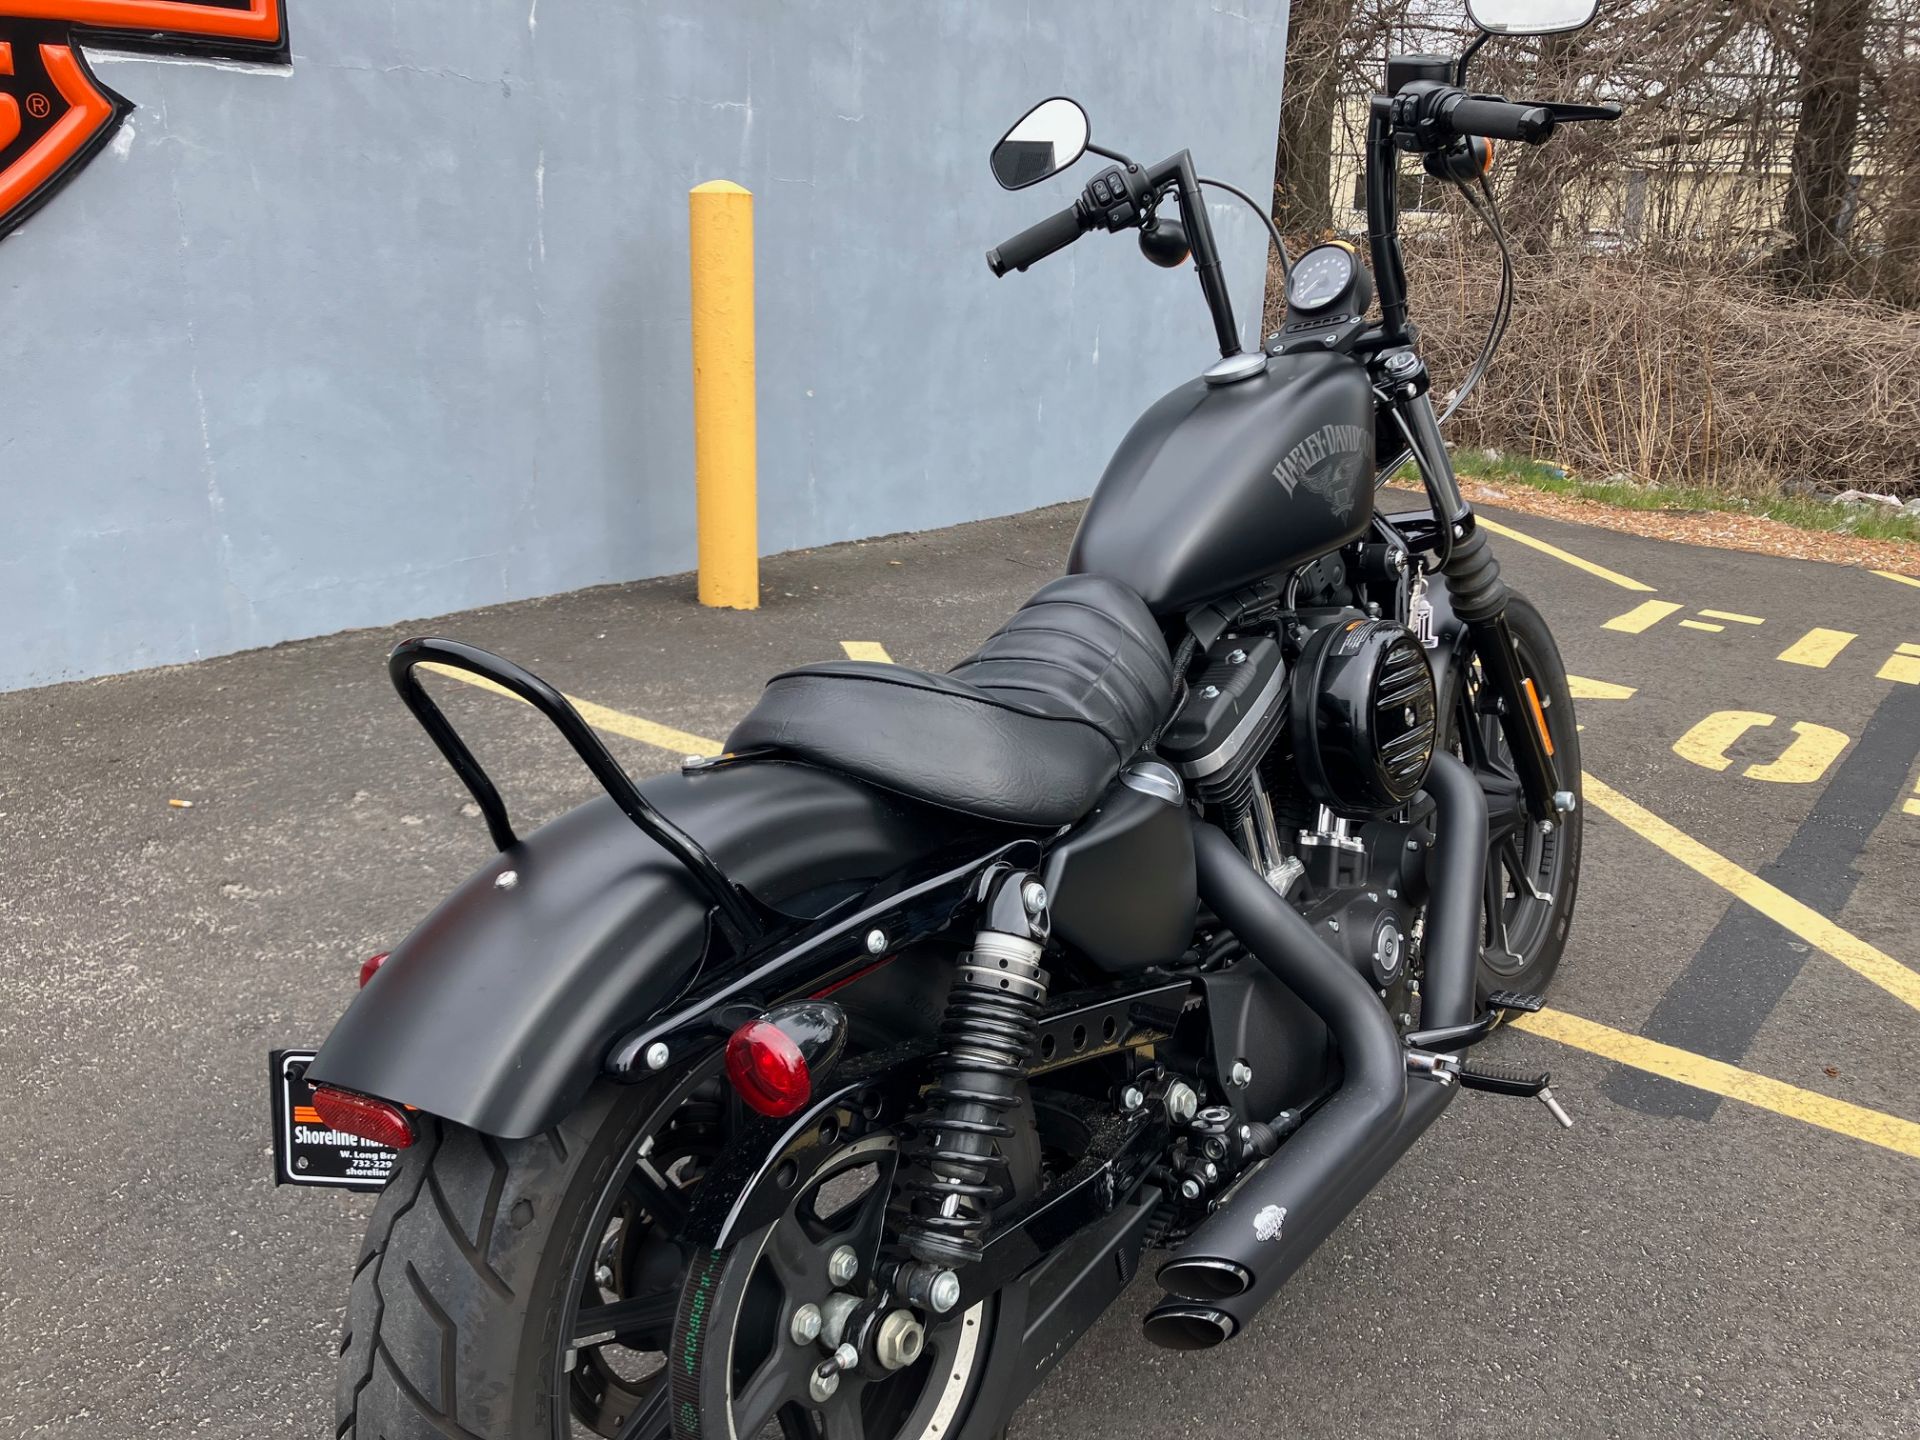 2018 Harley-Davidson IRON 883 in West Long Branch, New Jersey - Photo 3